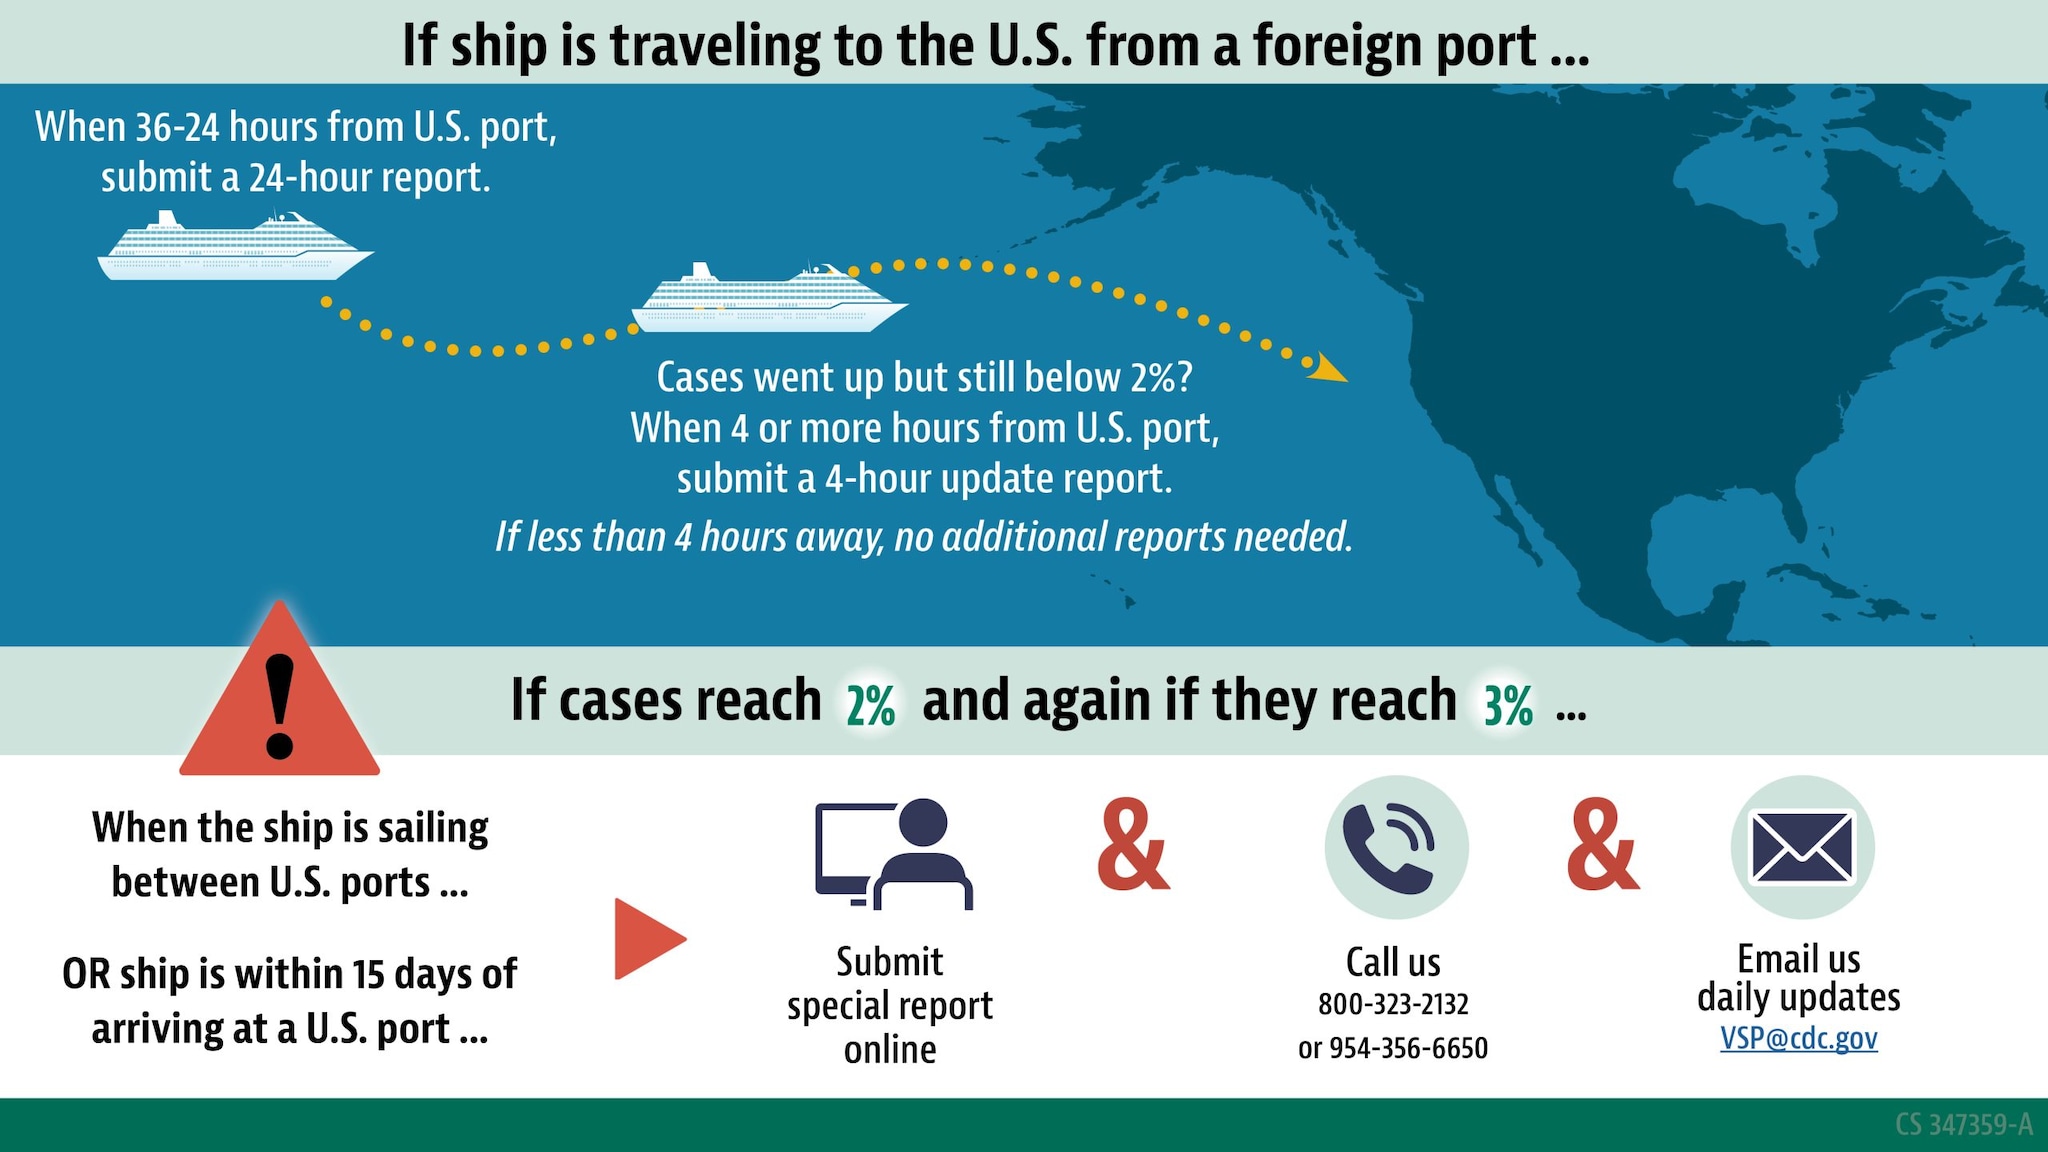 If ship is traveling to the U.S. from a foreign report...when 36-24 hours from U.S. port, submit a 24-hour report. Cases went up but still below 2%? When 4 or more hours from U.S. port, submit a 4-hour update report. If less than 4 hours away, no additional reports needed. If cases reach 2% and again if they reach 3%...When the ship is sailing between U.S. reports OR ship is within 15 days of arriving at a U.S. port, Submit special report online and call us (800-323-2132 or 954-356-6650) and email us daily updates (VSP@cdc.gov).